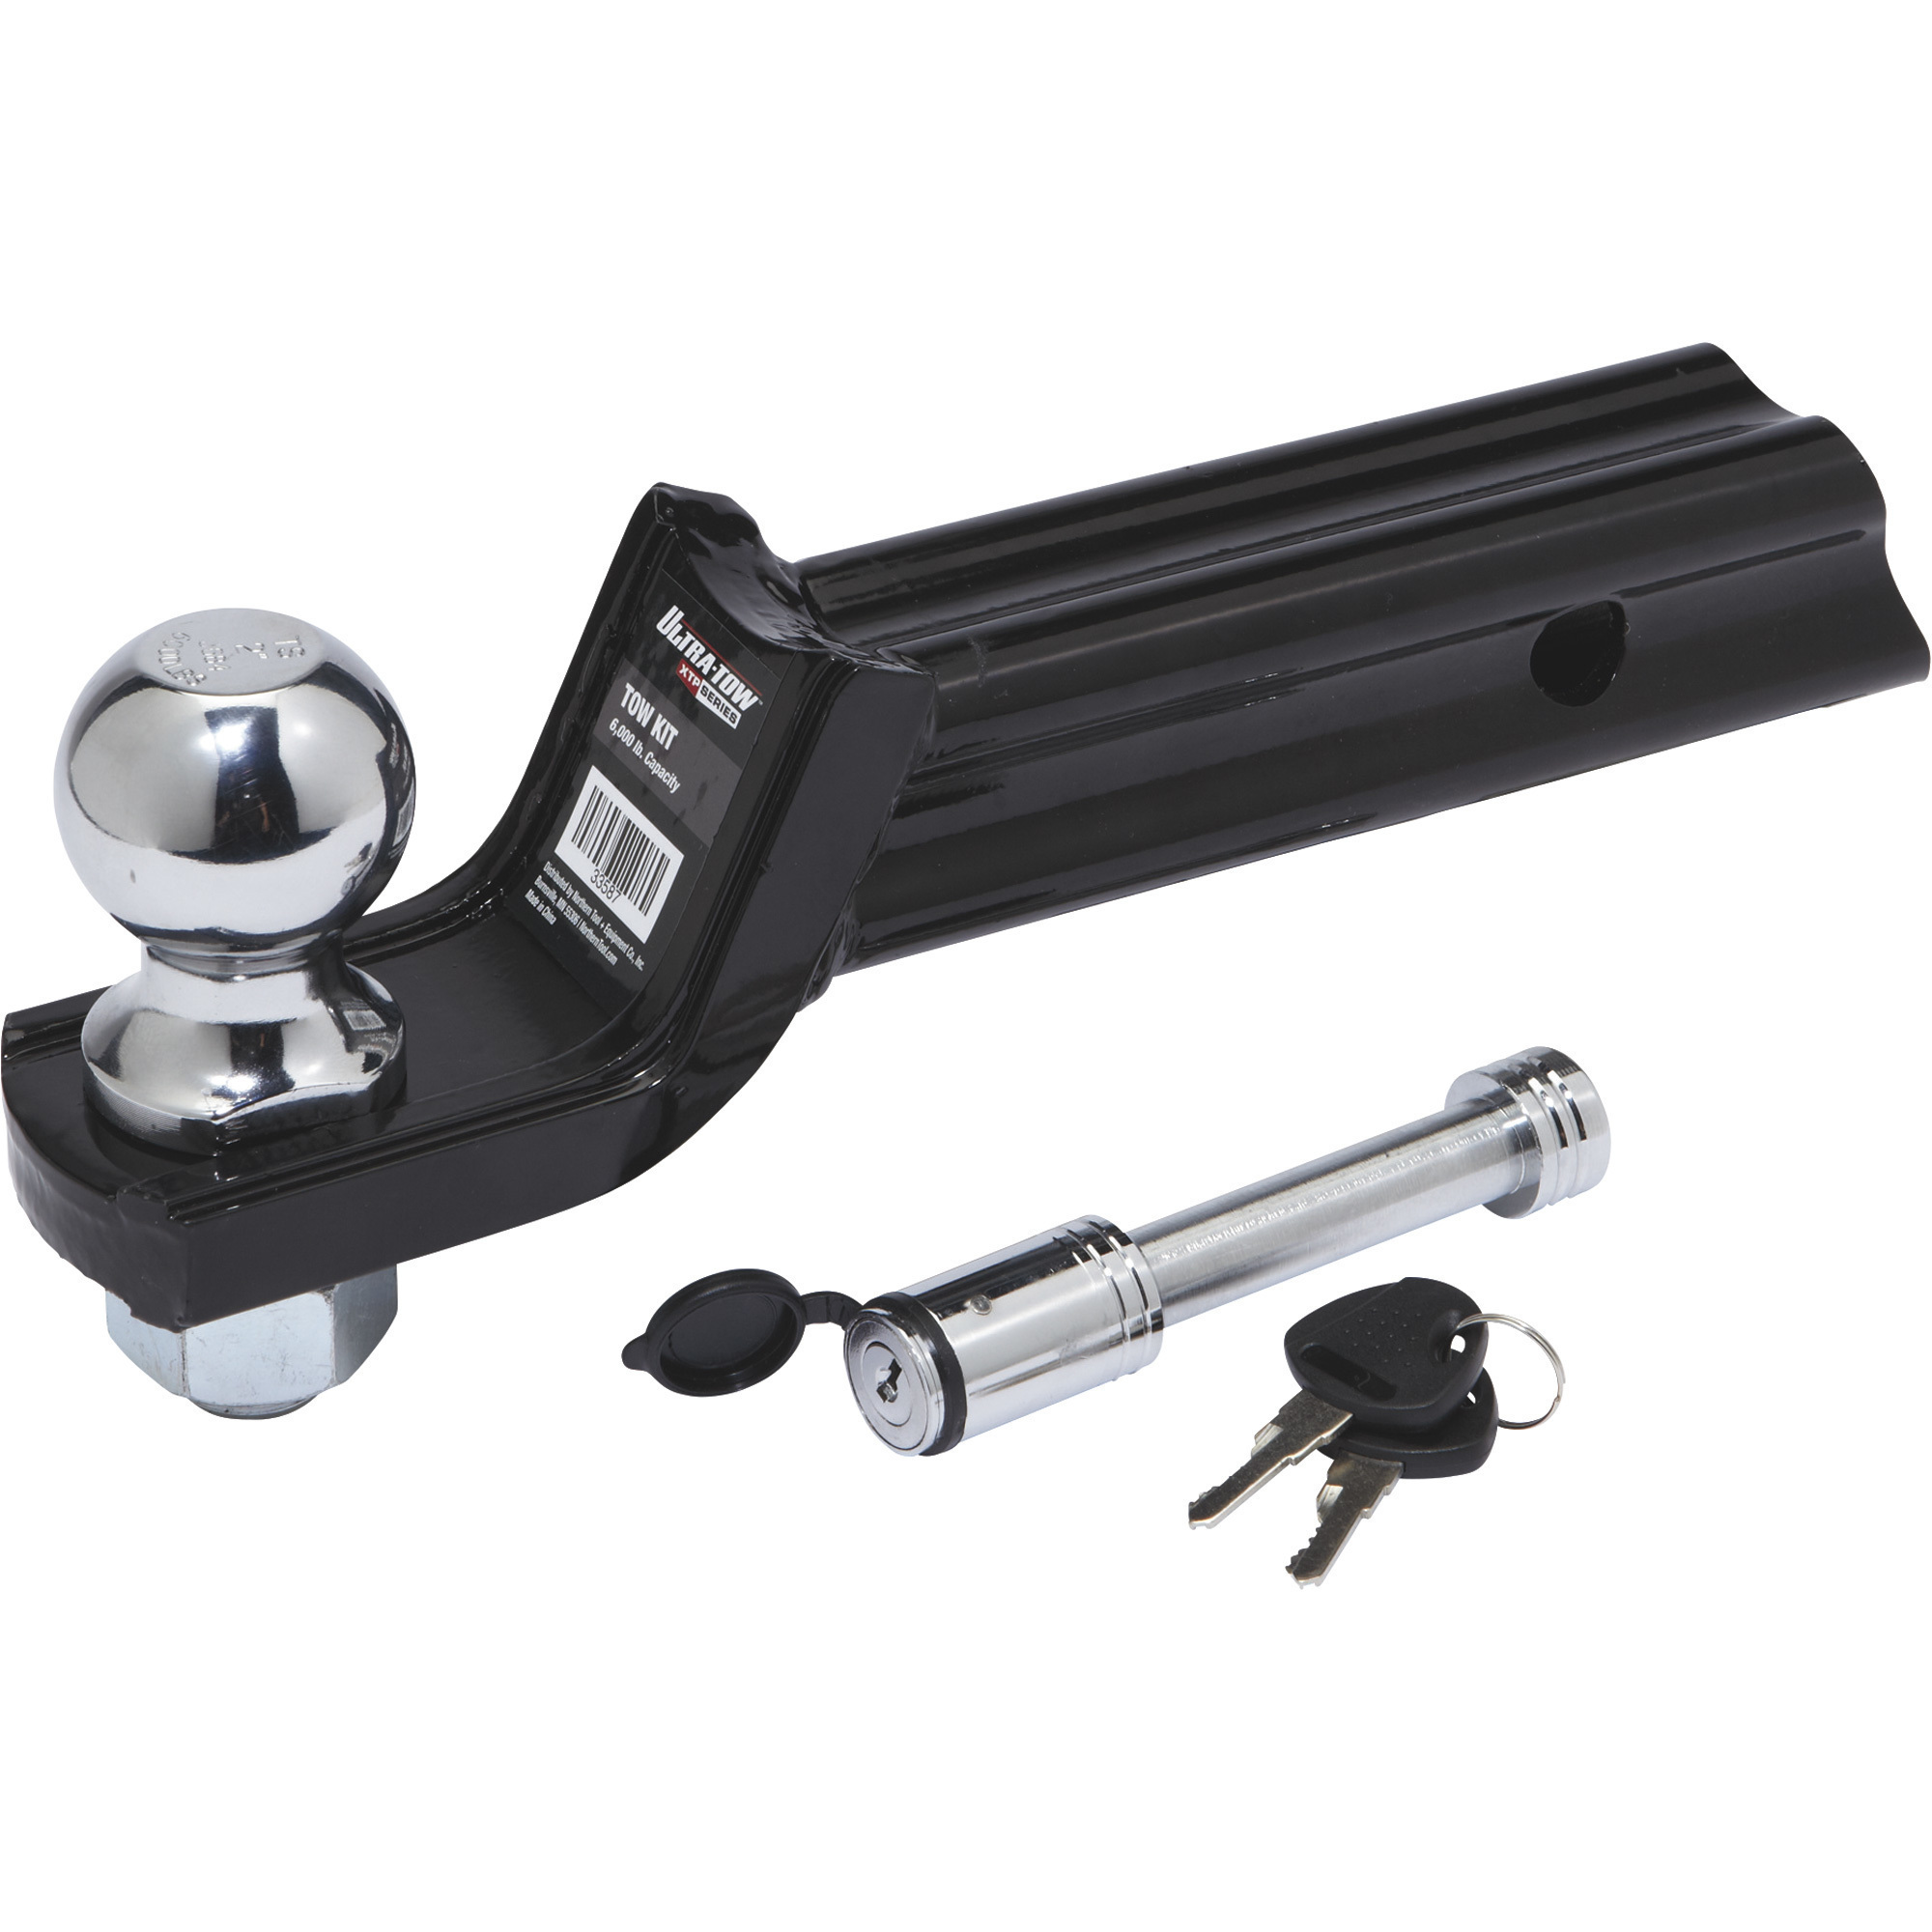 Ultra-Tow XTP Receiver Hitch Starter Kit - Class III, 2Inch Drop, 6,000-Lb. Tow Weight, Locking Hitch Pin